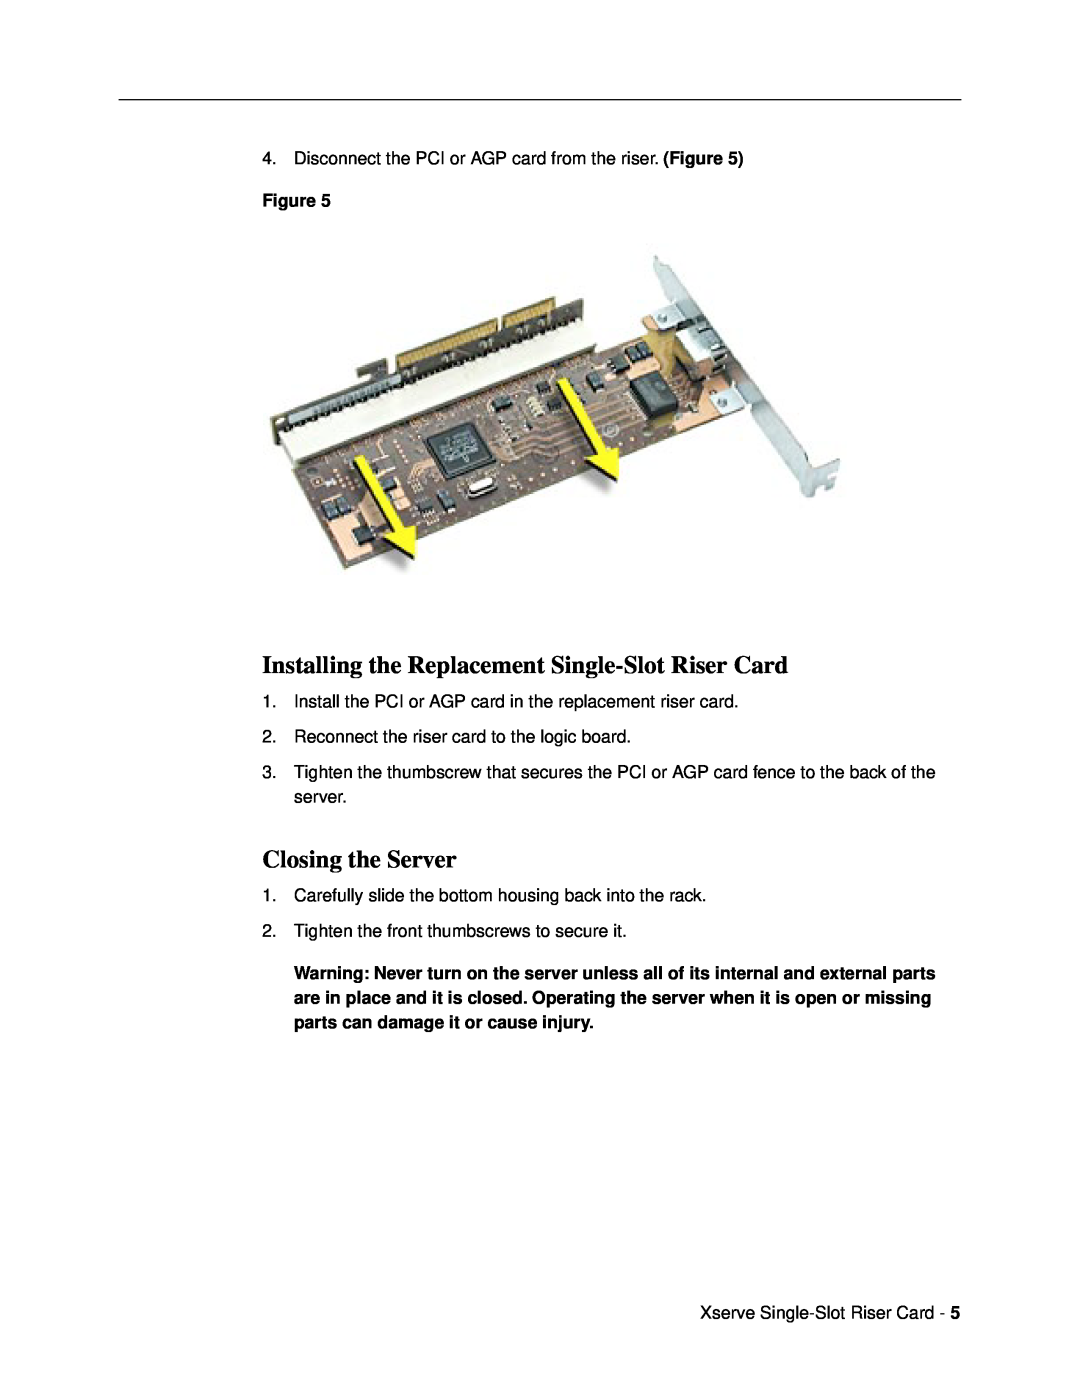 Apple 073-0691 warranty Installing the Replacement Single-Slot Riser Card, Closing the Server 